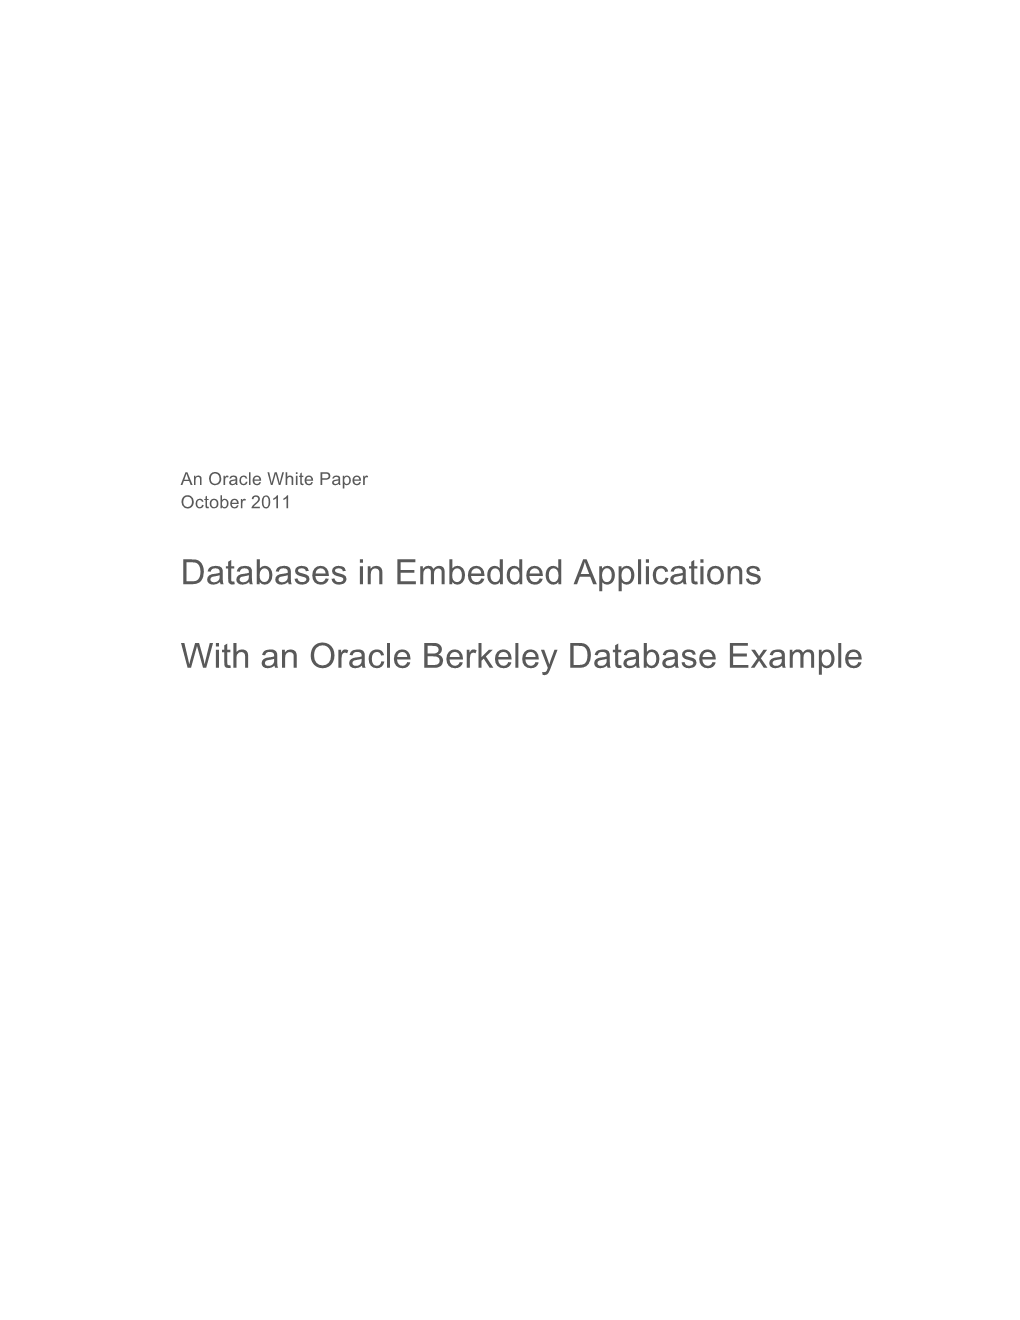 Databases in Embedded Applications with an Oracle Berkeley Database